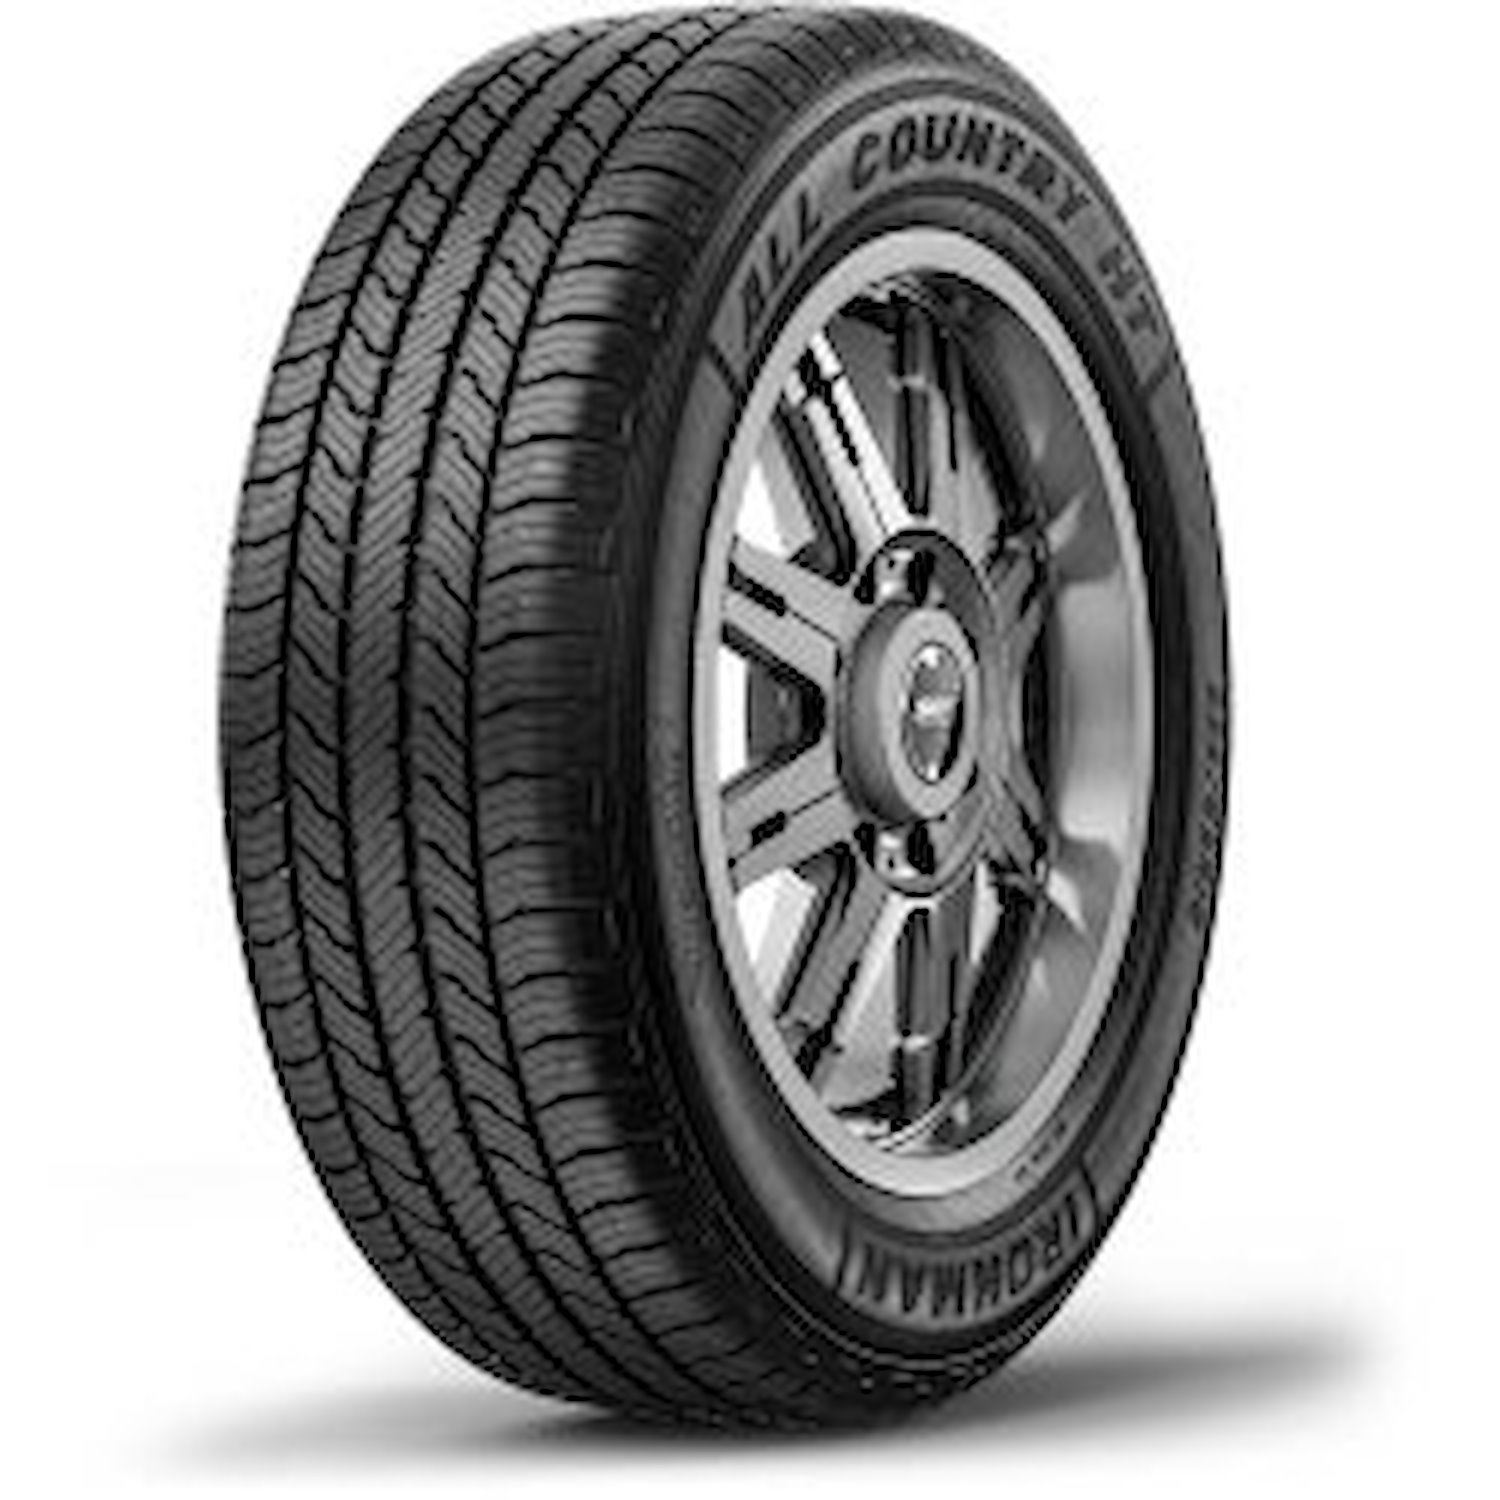 03146 All Country HT Tire, 255/50R20XL, 109V